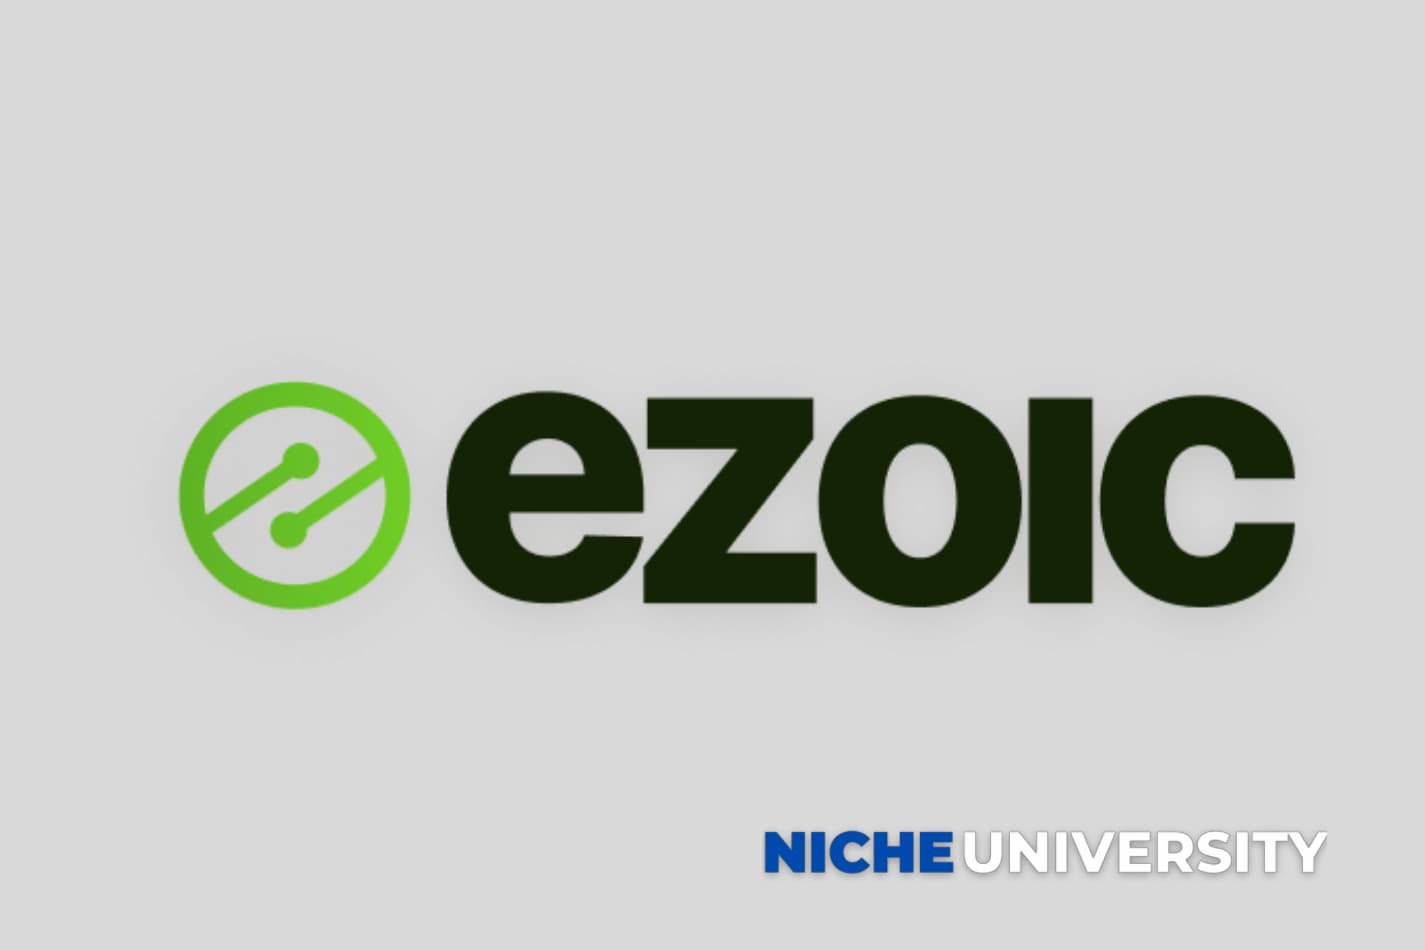 Ezoic display ads logo against a black background